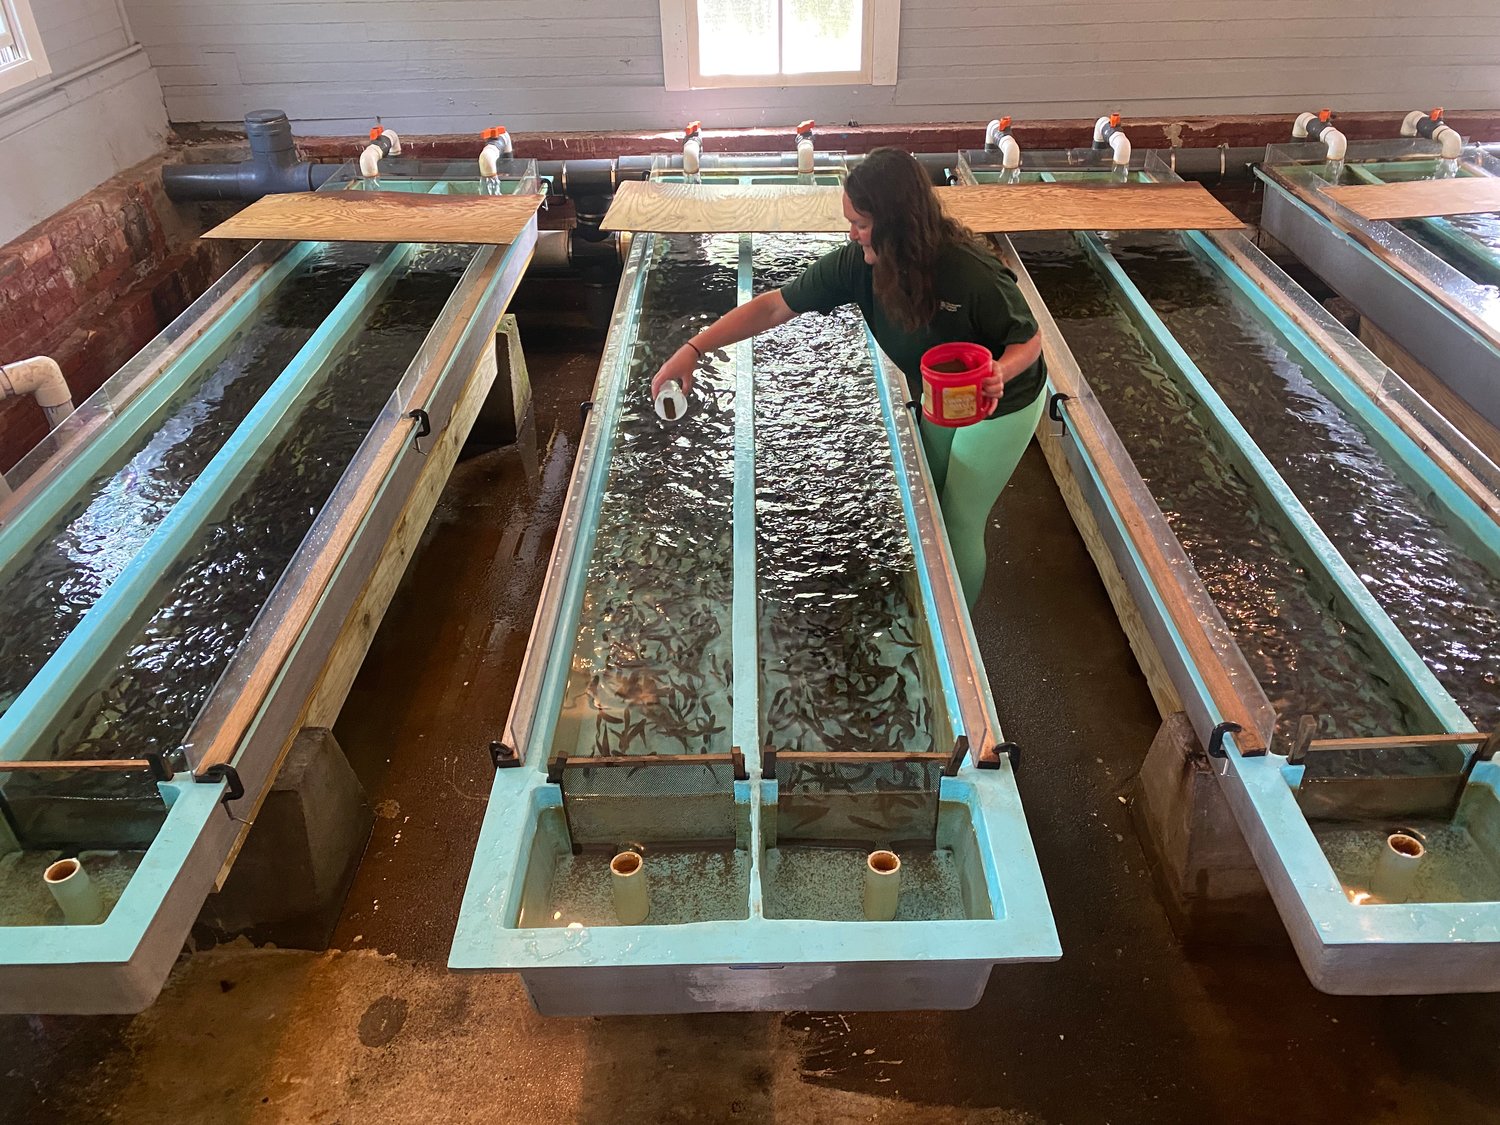 The observation deck overlooks the hatchery troughs, where trout have been propagated for over a century.